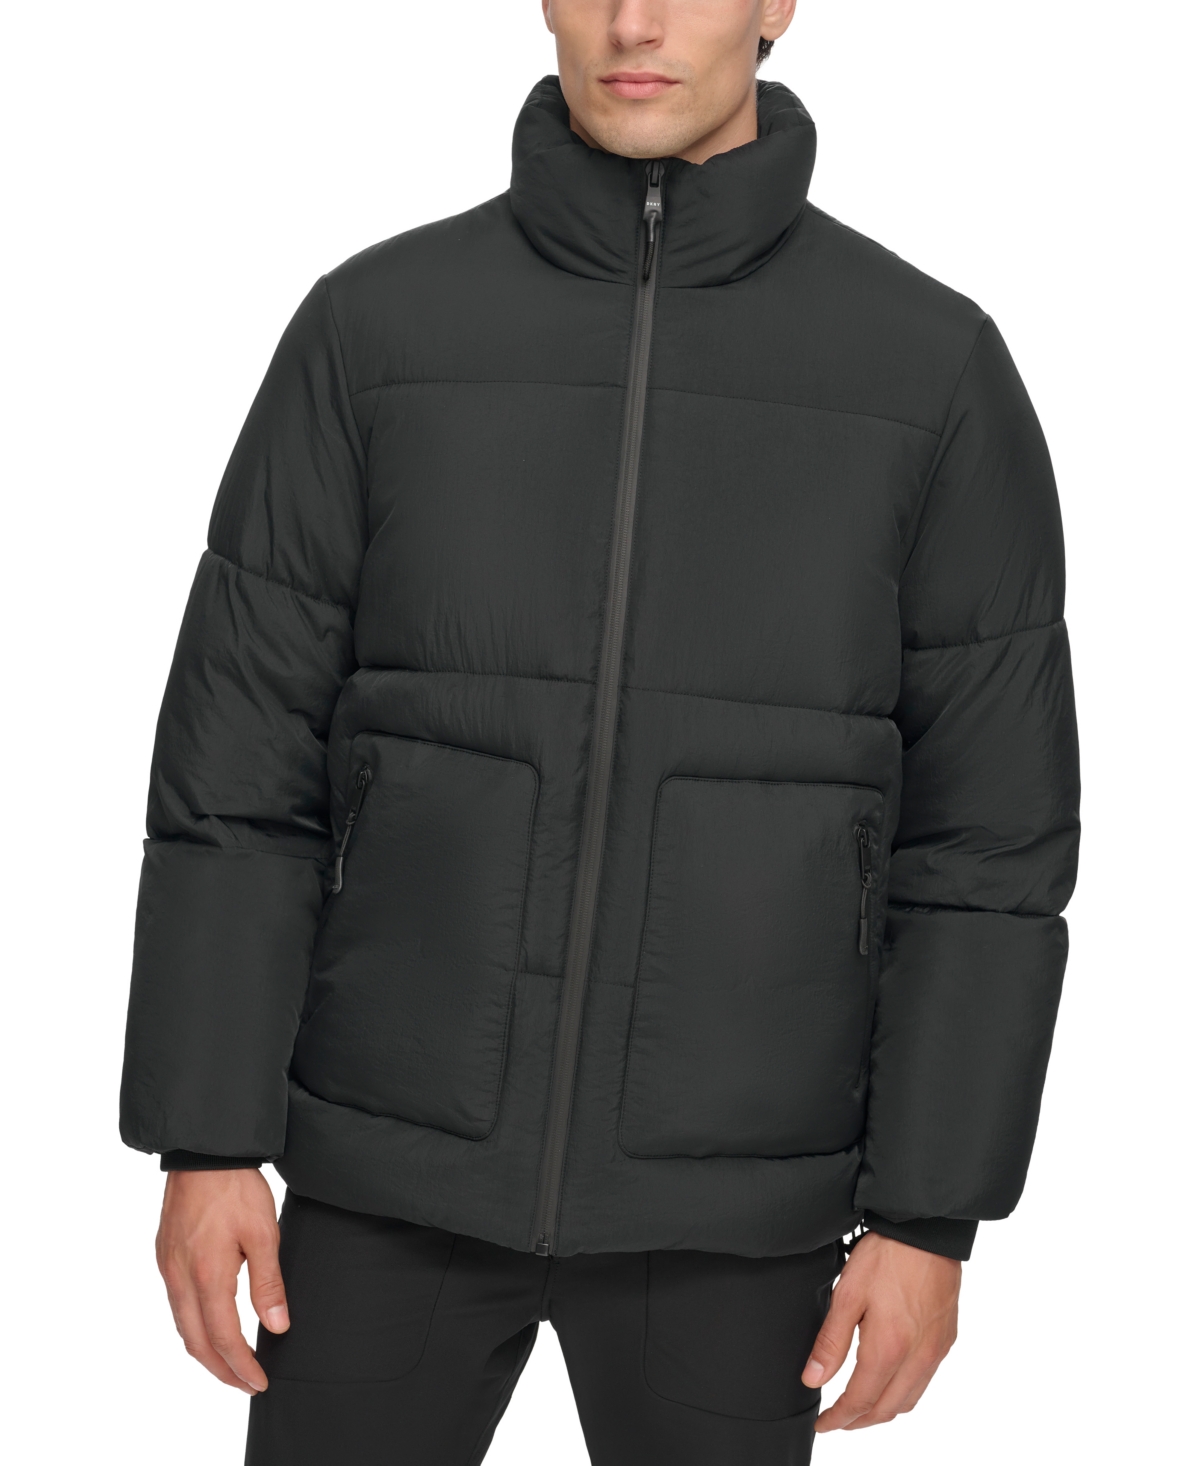 Men's Refined Quilted Full-Zip Stand Collar Puffer Jacket - Black